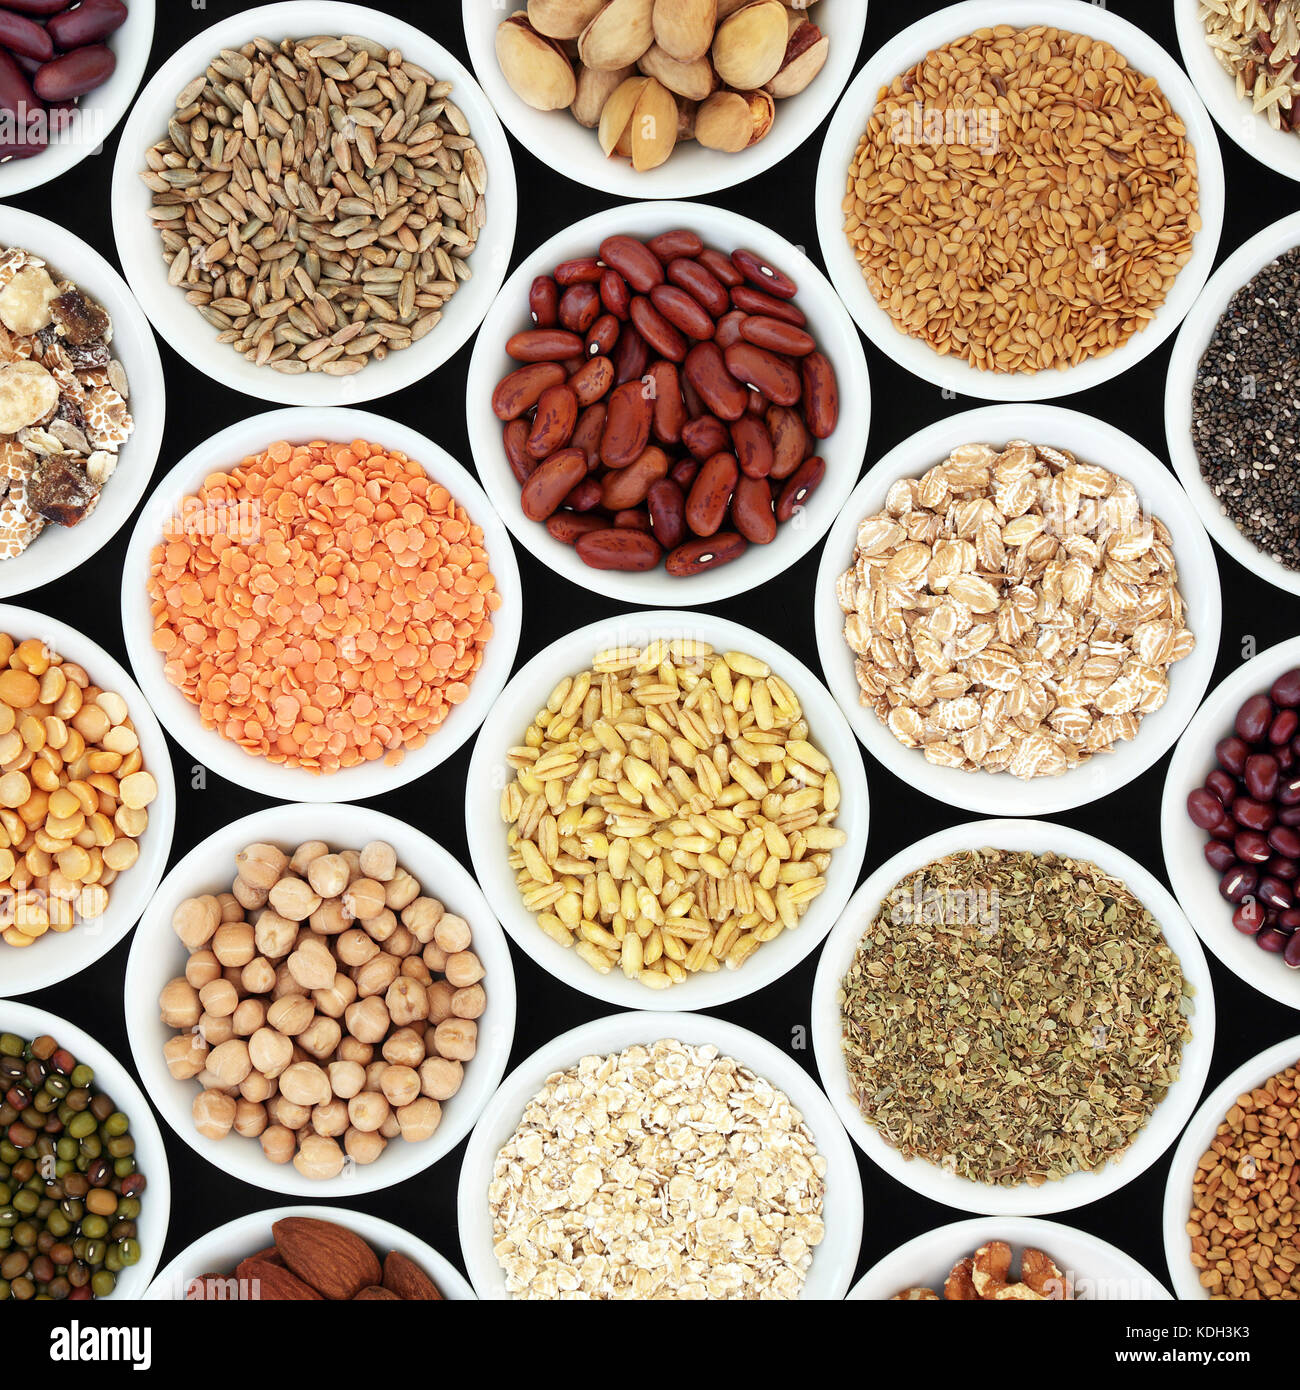 Dried high fiber health food with legumes, cereals, nuts, grain, seeds, with foods high in omega 3 fatty acid, antioxidants and vitamins, top view. Stock Photo